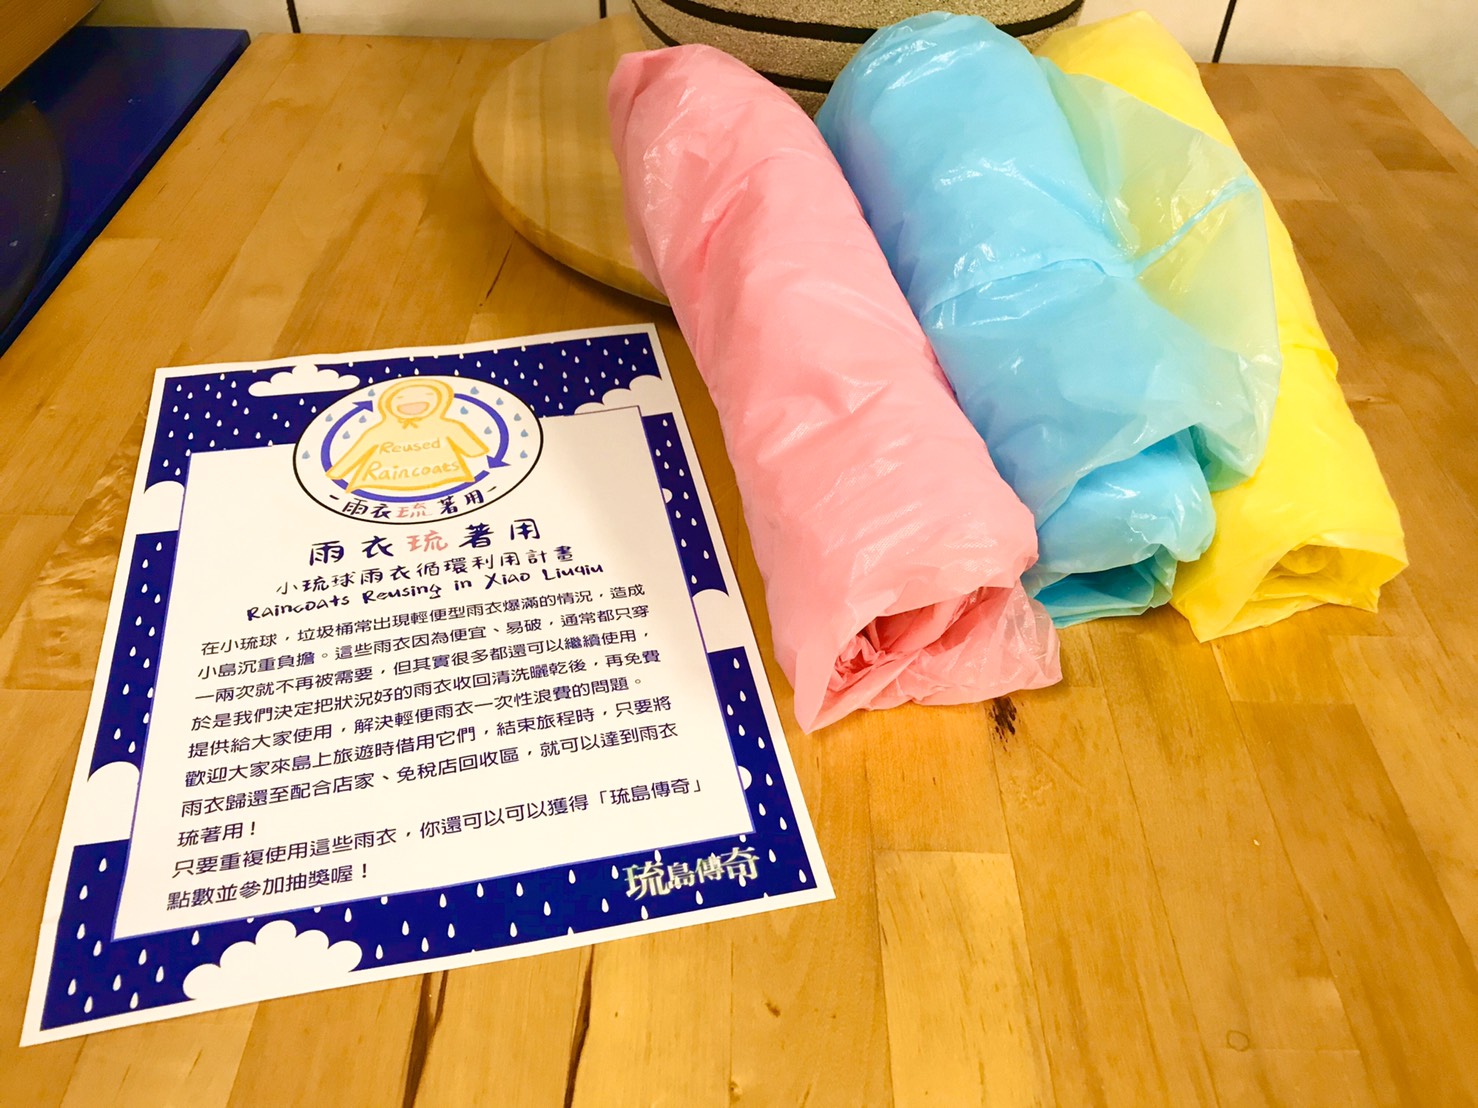 Legend of Liuqiu initiated the “Reusable Raincoats in Liuqiu” project. They wash and dry the disposable raincoats before placing them at B&Bs and local shops. Visitors can use the raincoats for free. Reusing the raincoats helps to reduce the amount of garbage created by tourists in Liuqiu.  (Photo credit: Chen Hung-chun)